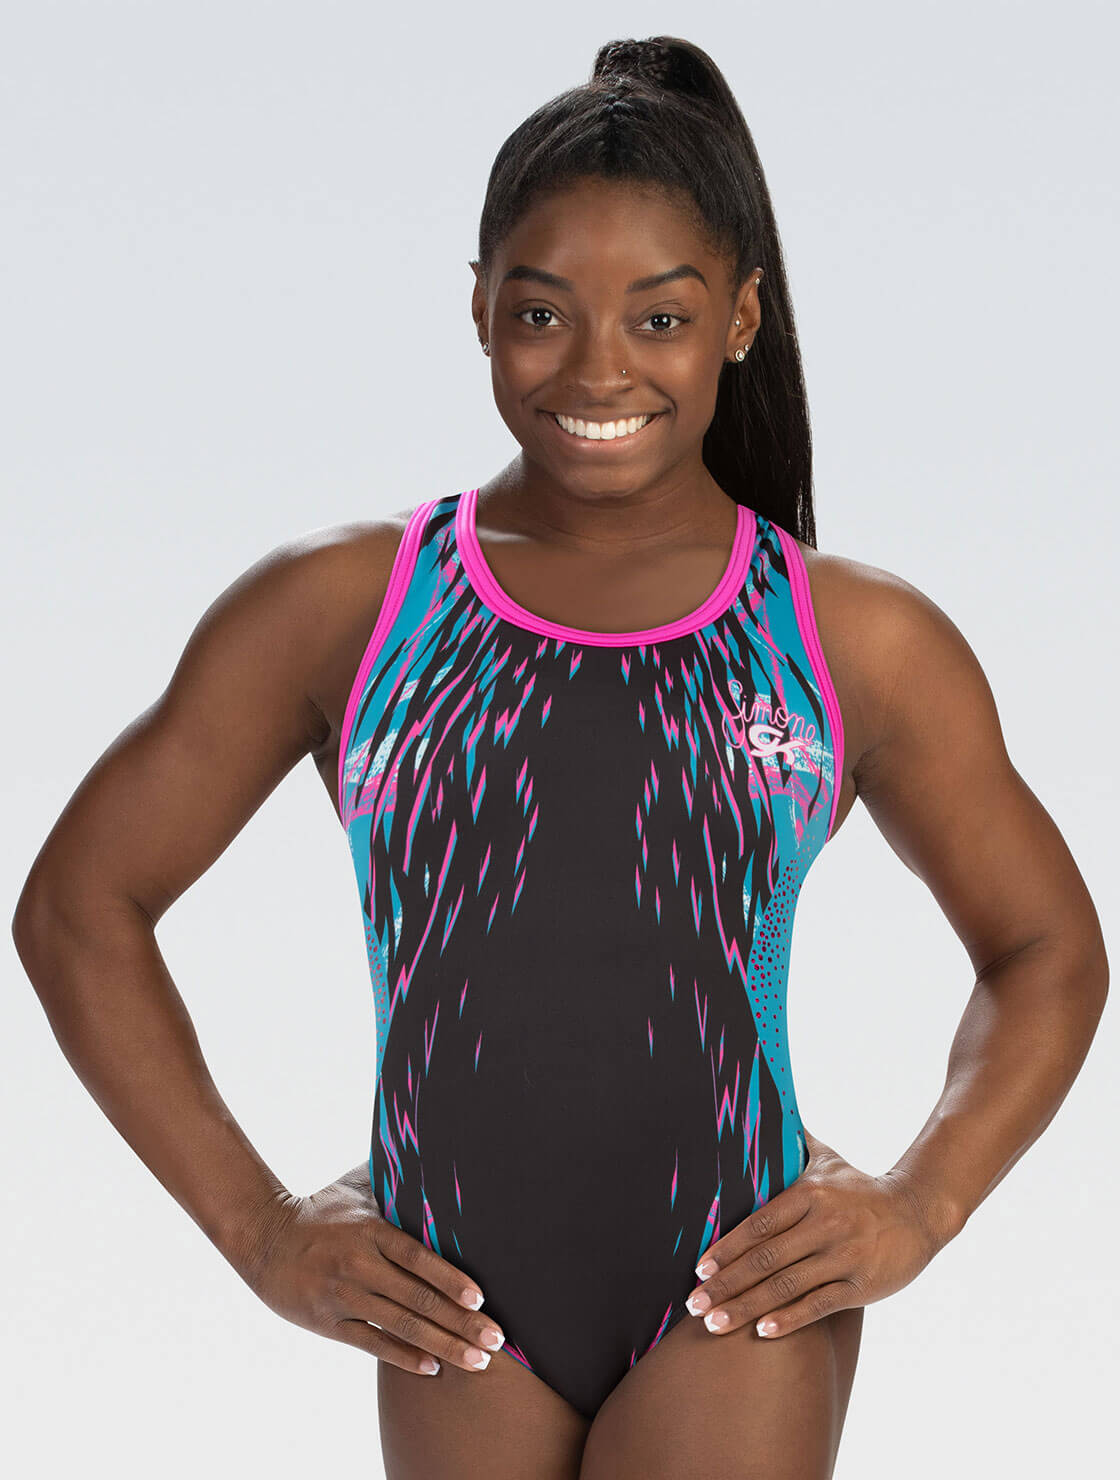 GK Elite Simone Biles Mythical Muse Leotard Adult Large : :  Clothing, Shoes & Accessories